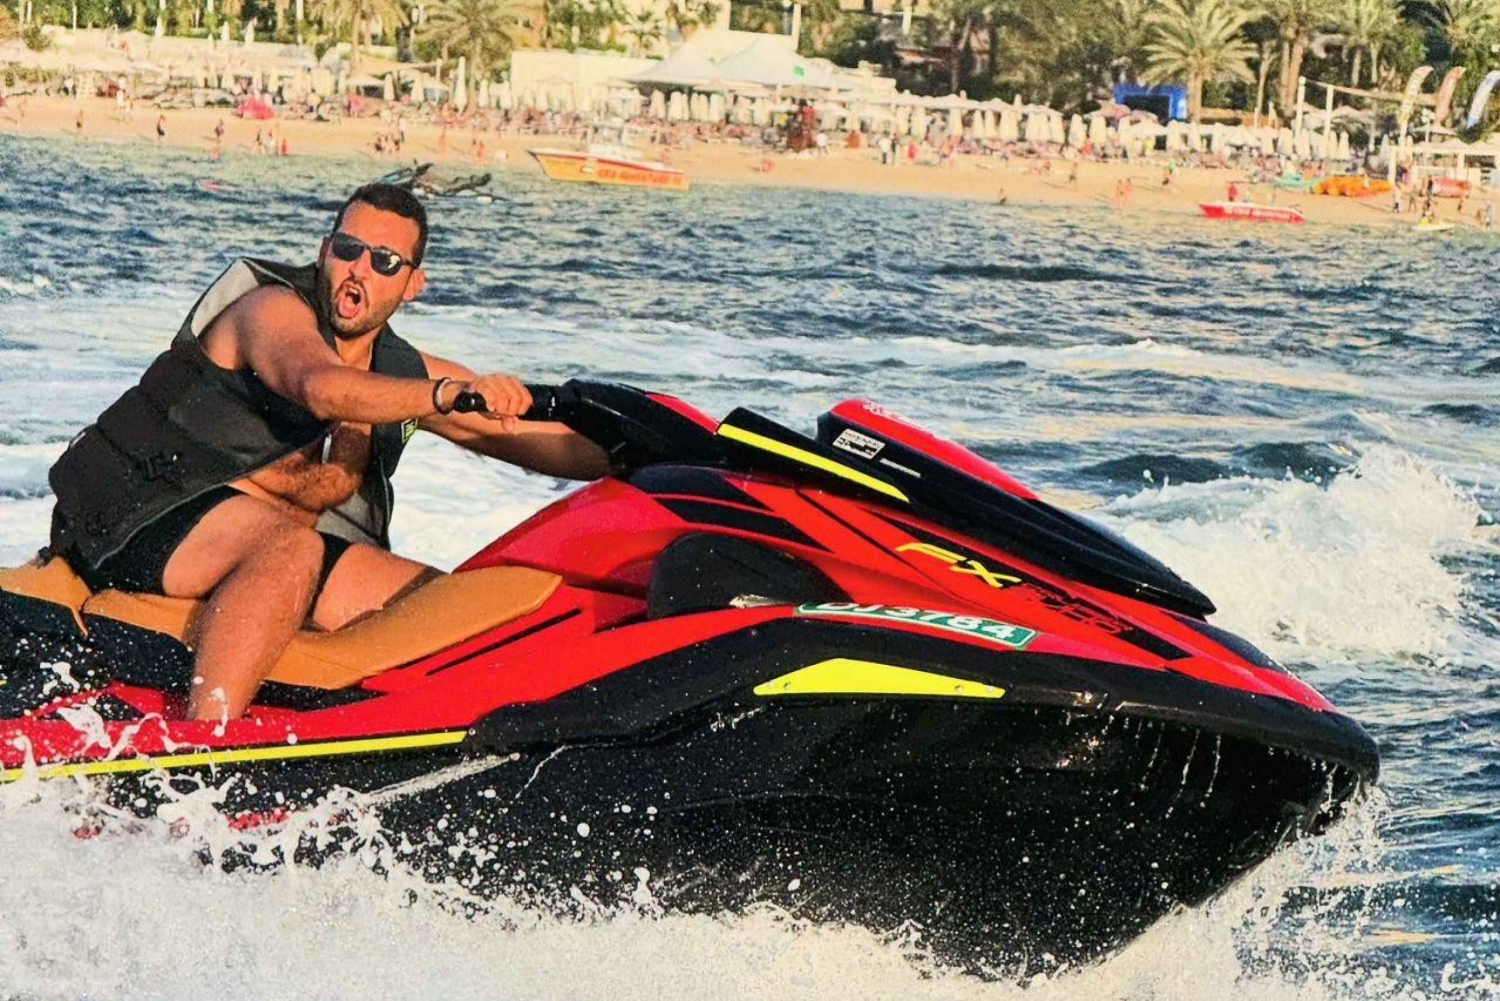 watersports: jet ski tour and more Activitis